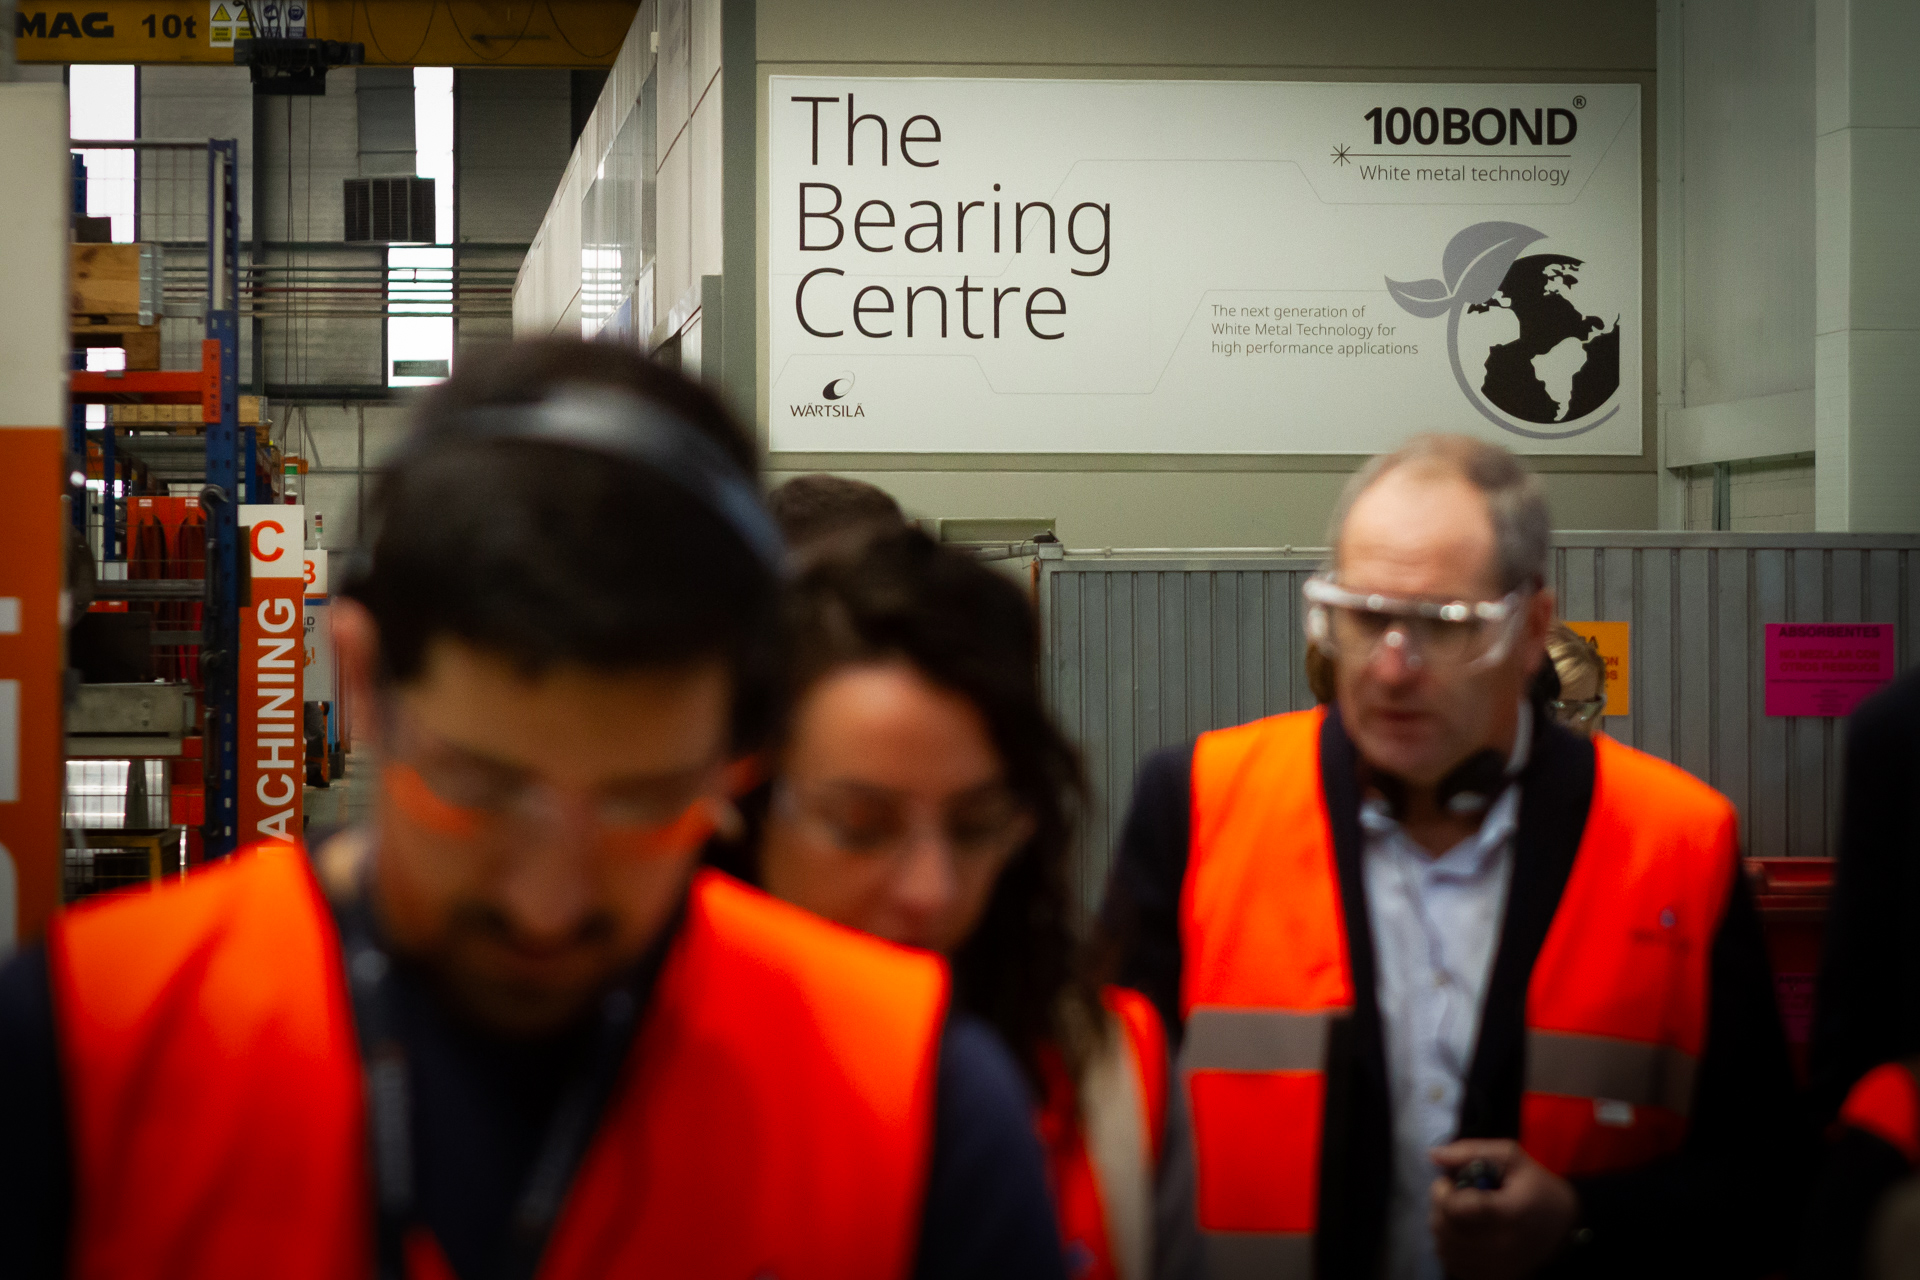 Photo of individuals in hi-vis jackets in front of The Bearing Centre banner.